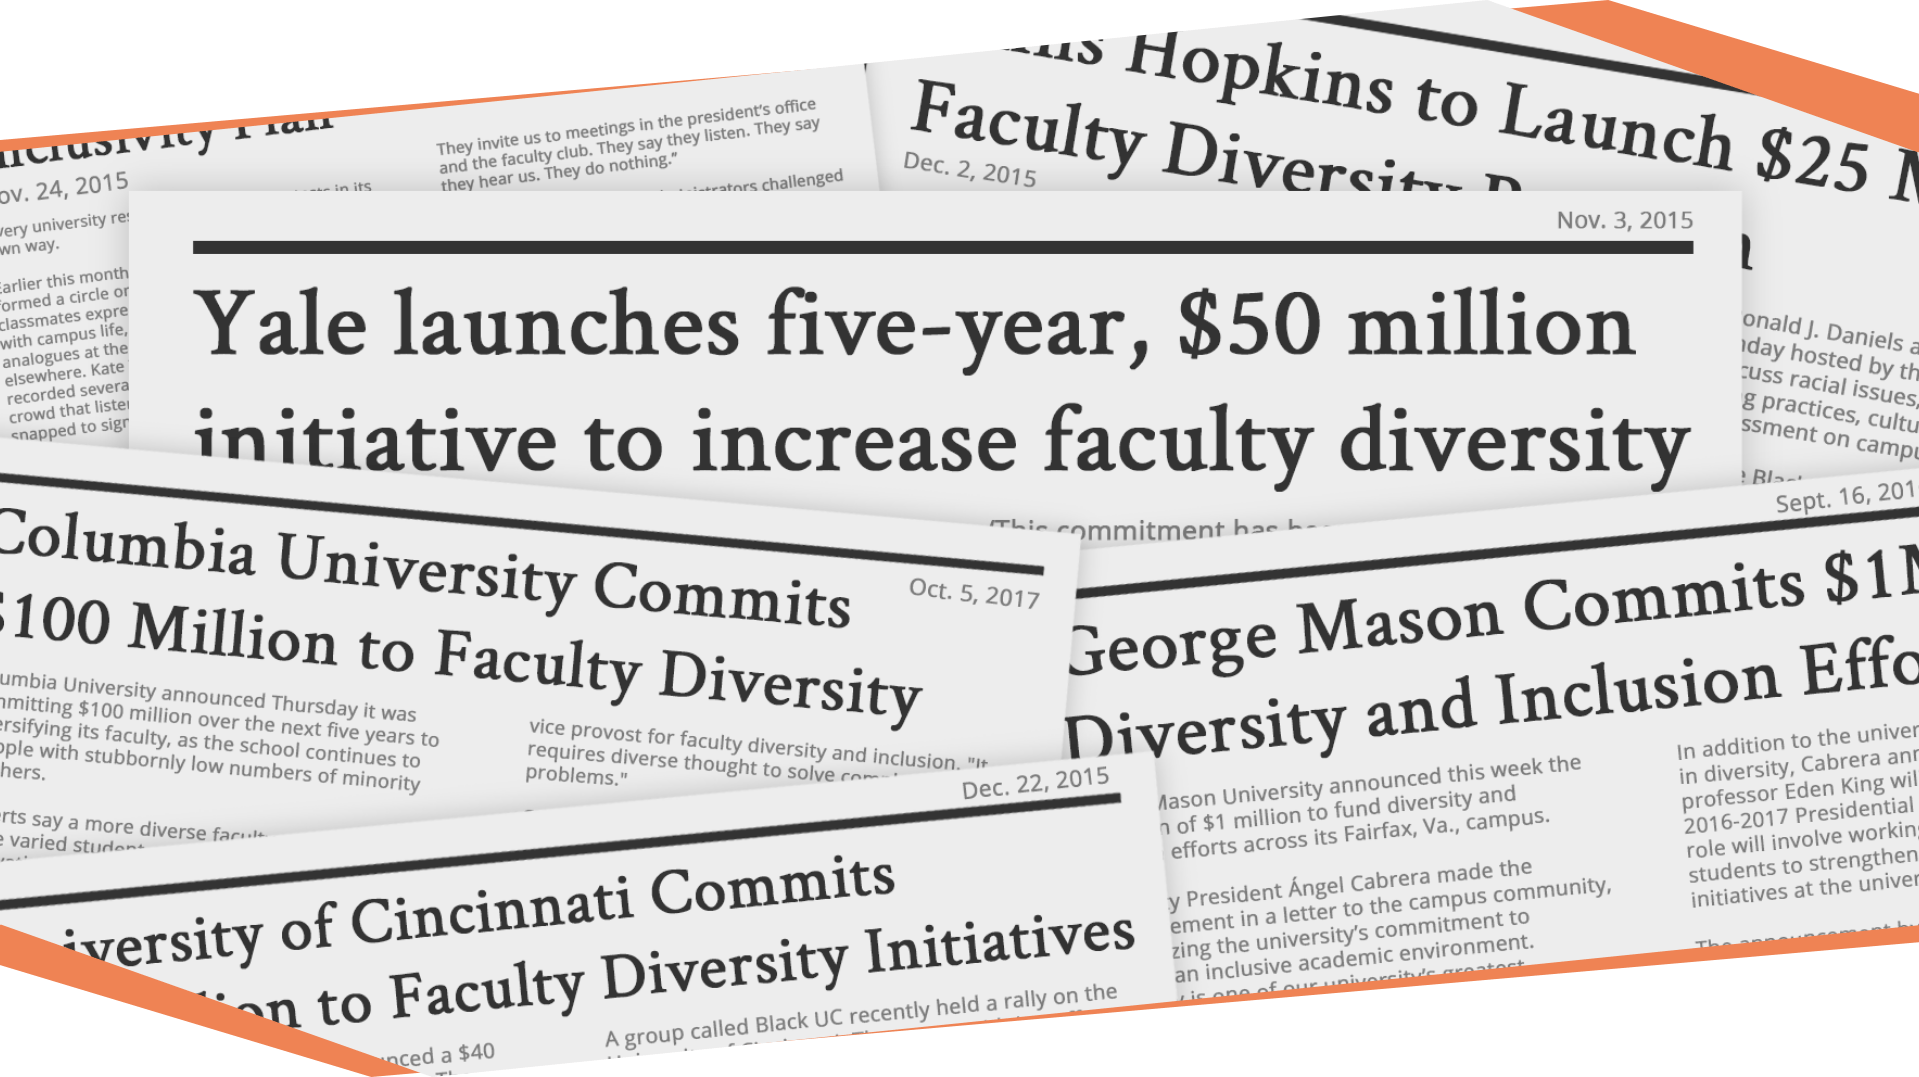 Newspaper coverage of universities planning to invest in diversity initiatives